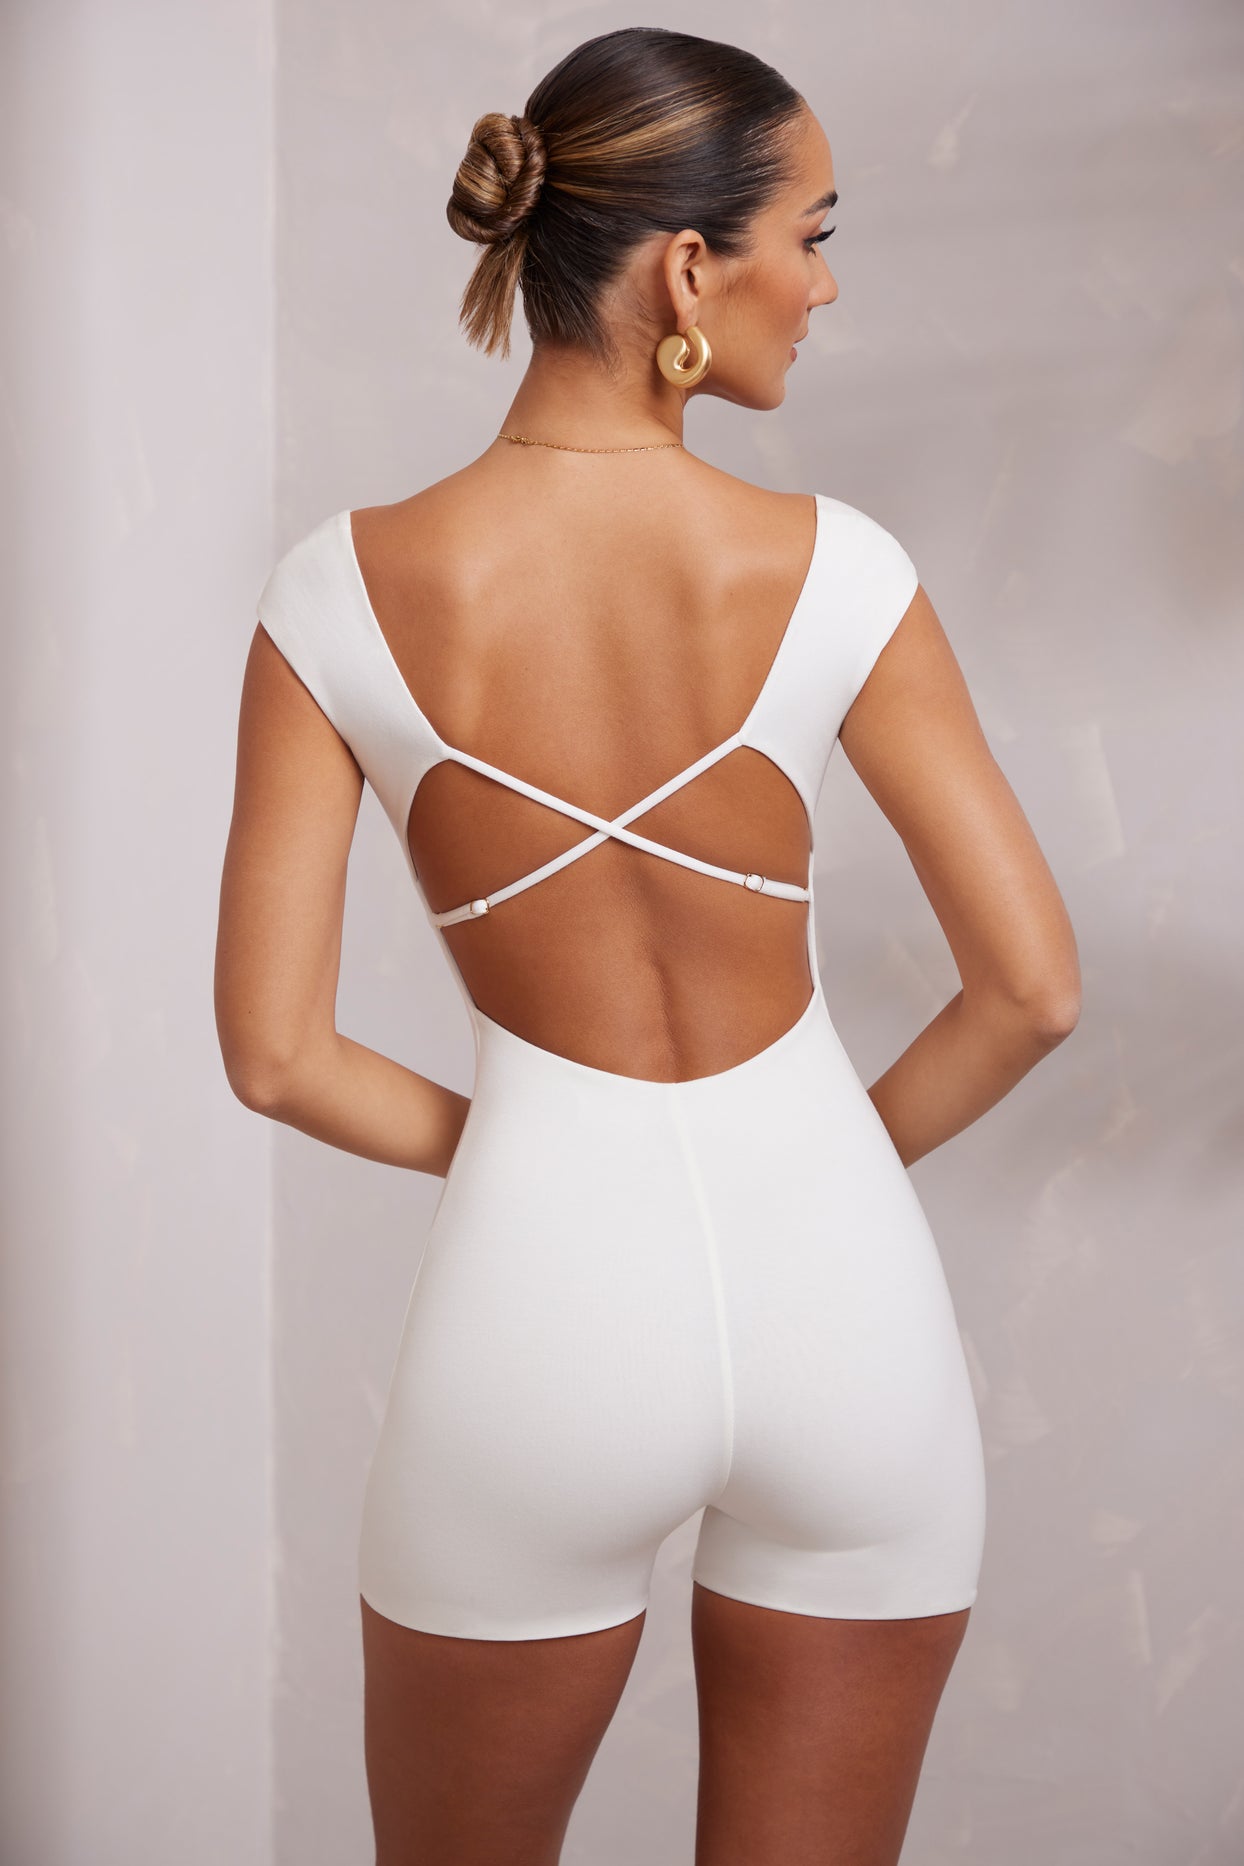 Strappy Lace Bodysuit White XS-M - Ireland - Why Not Style?